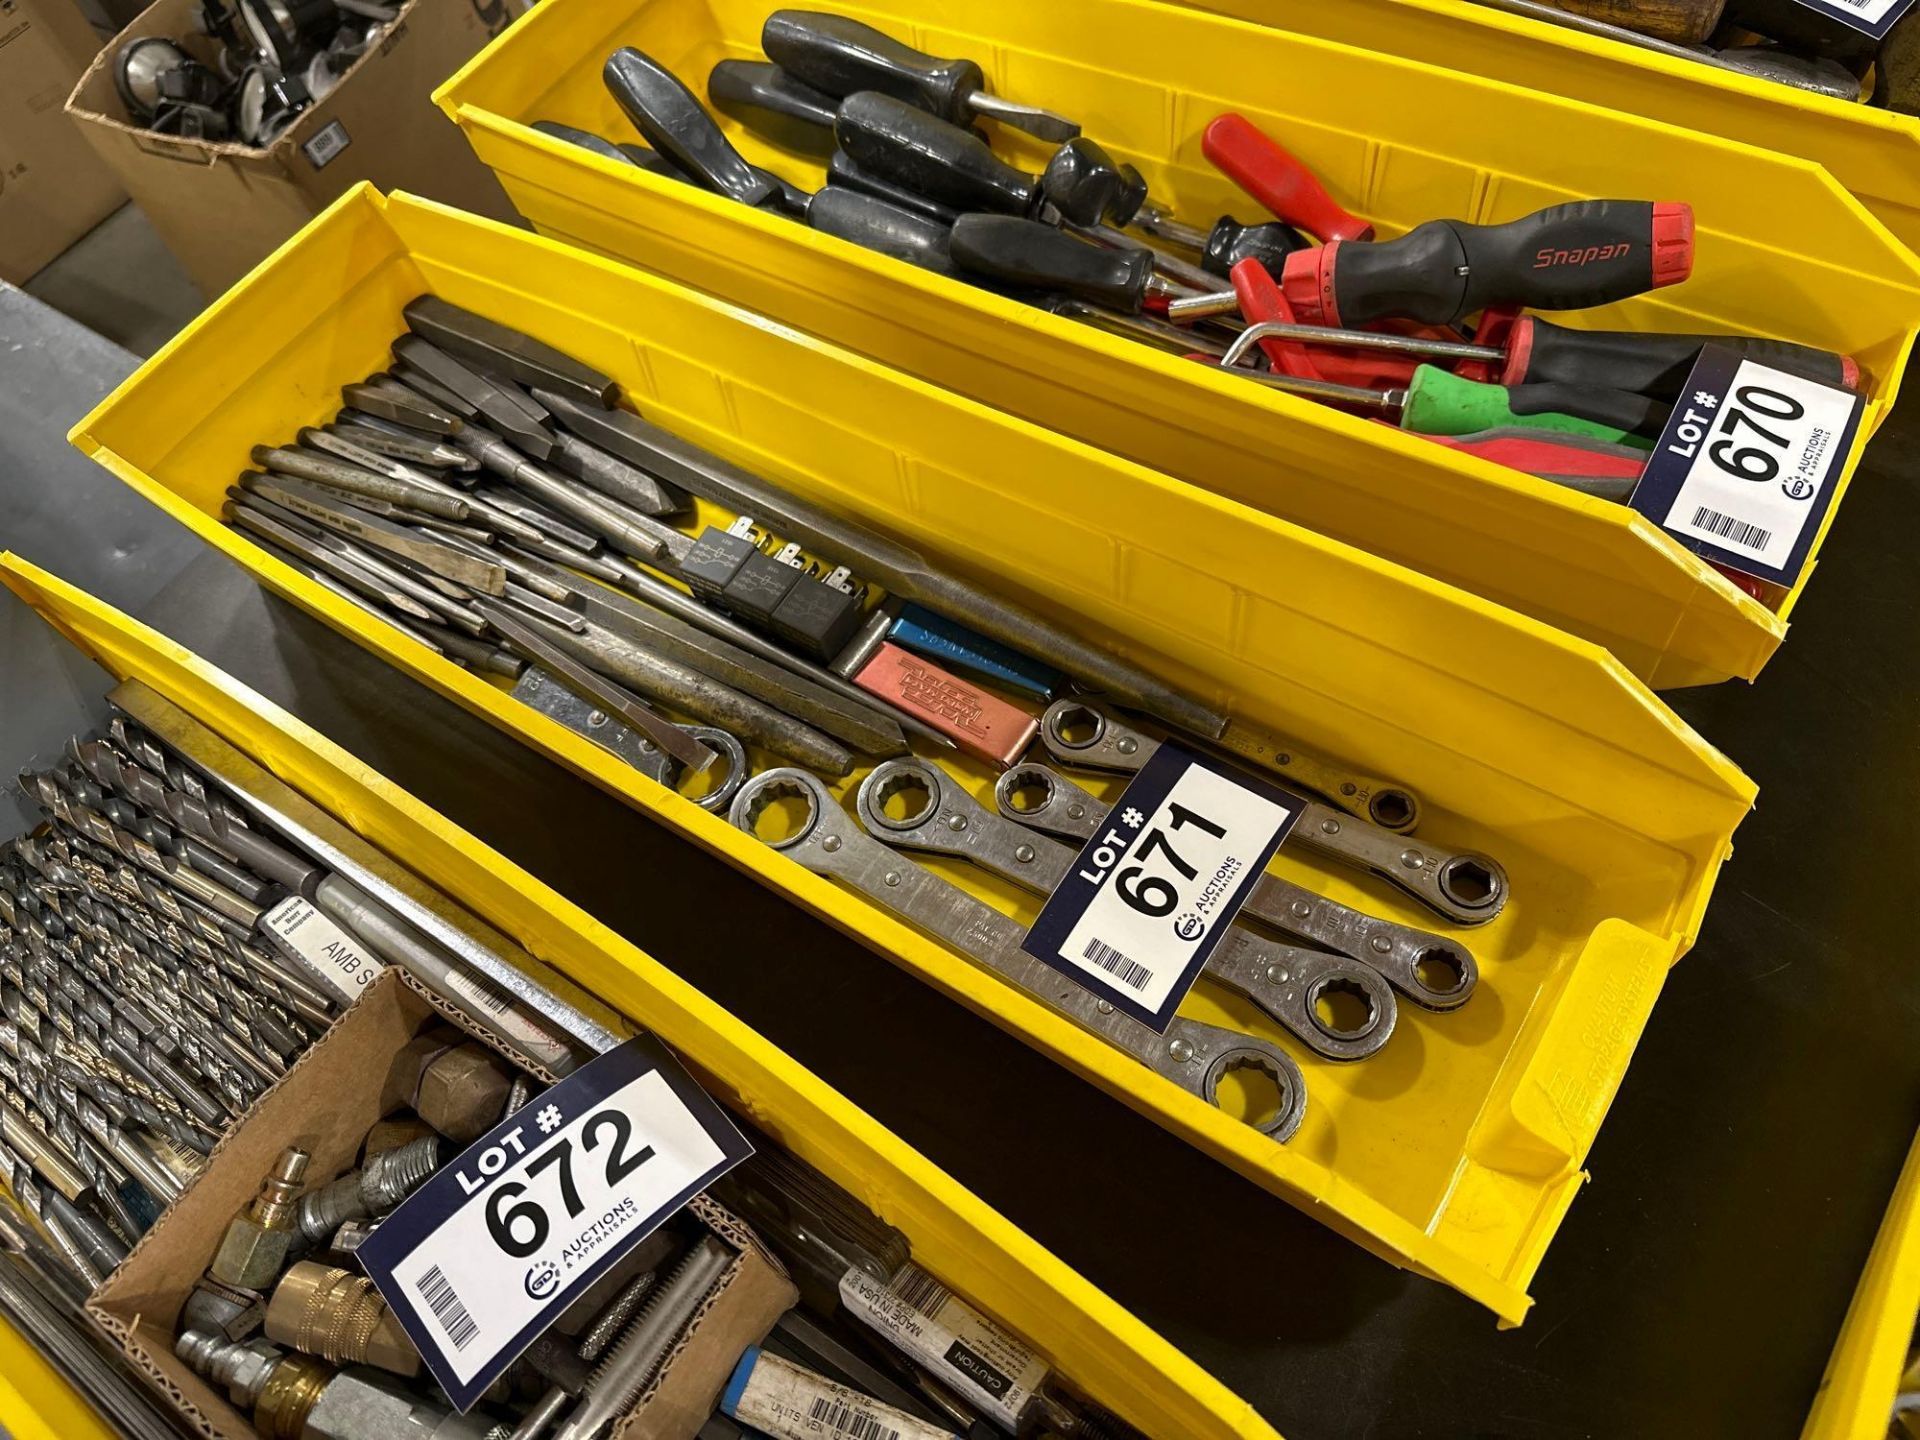 Lot of Asst. Ratchet Wrenches, Punches, etc. - Image 3 of 5